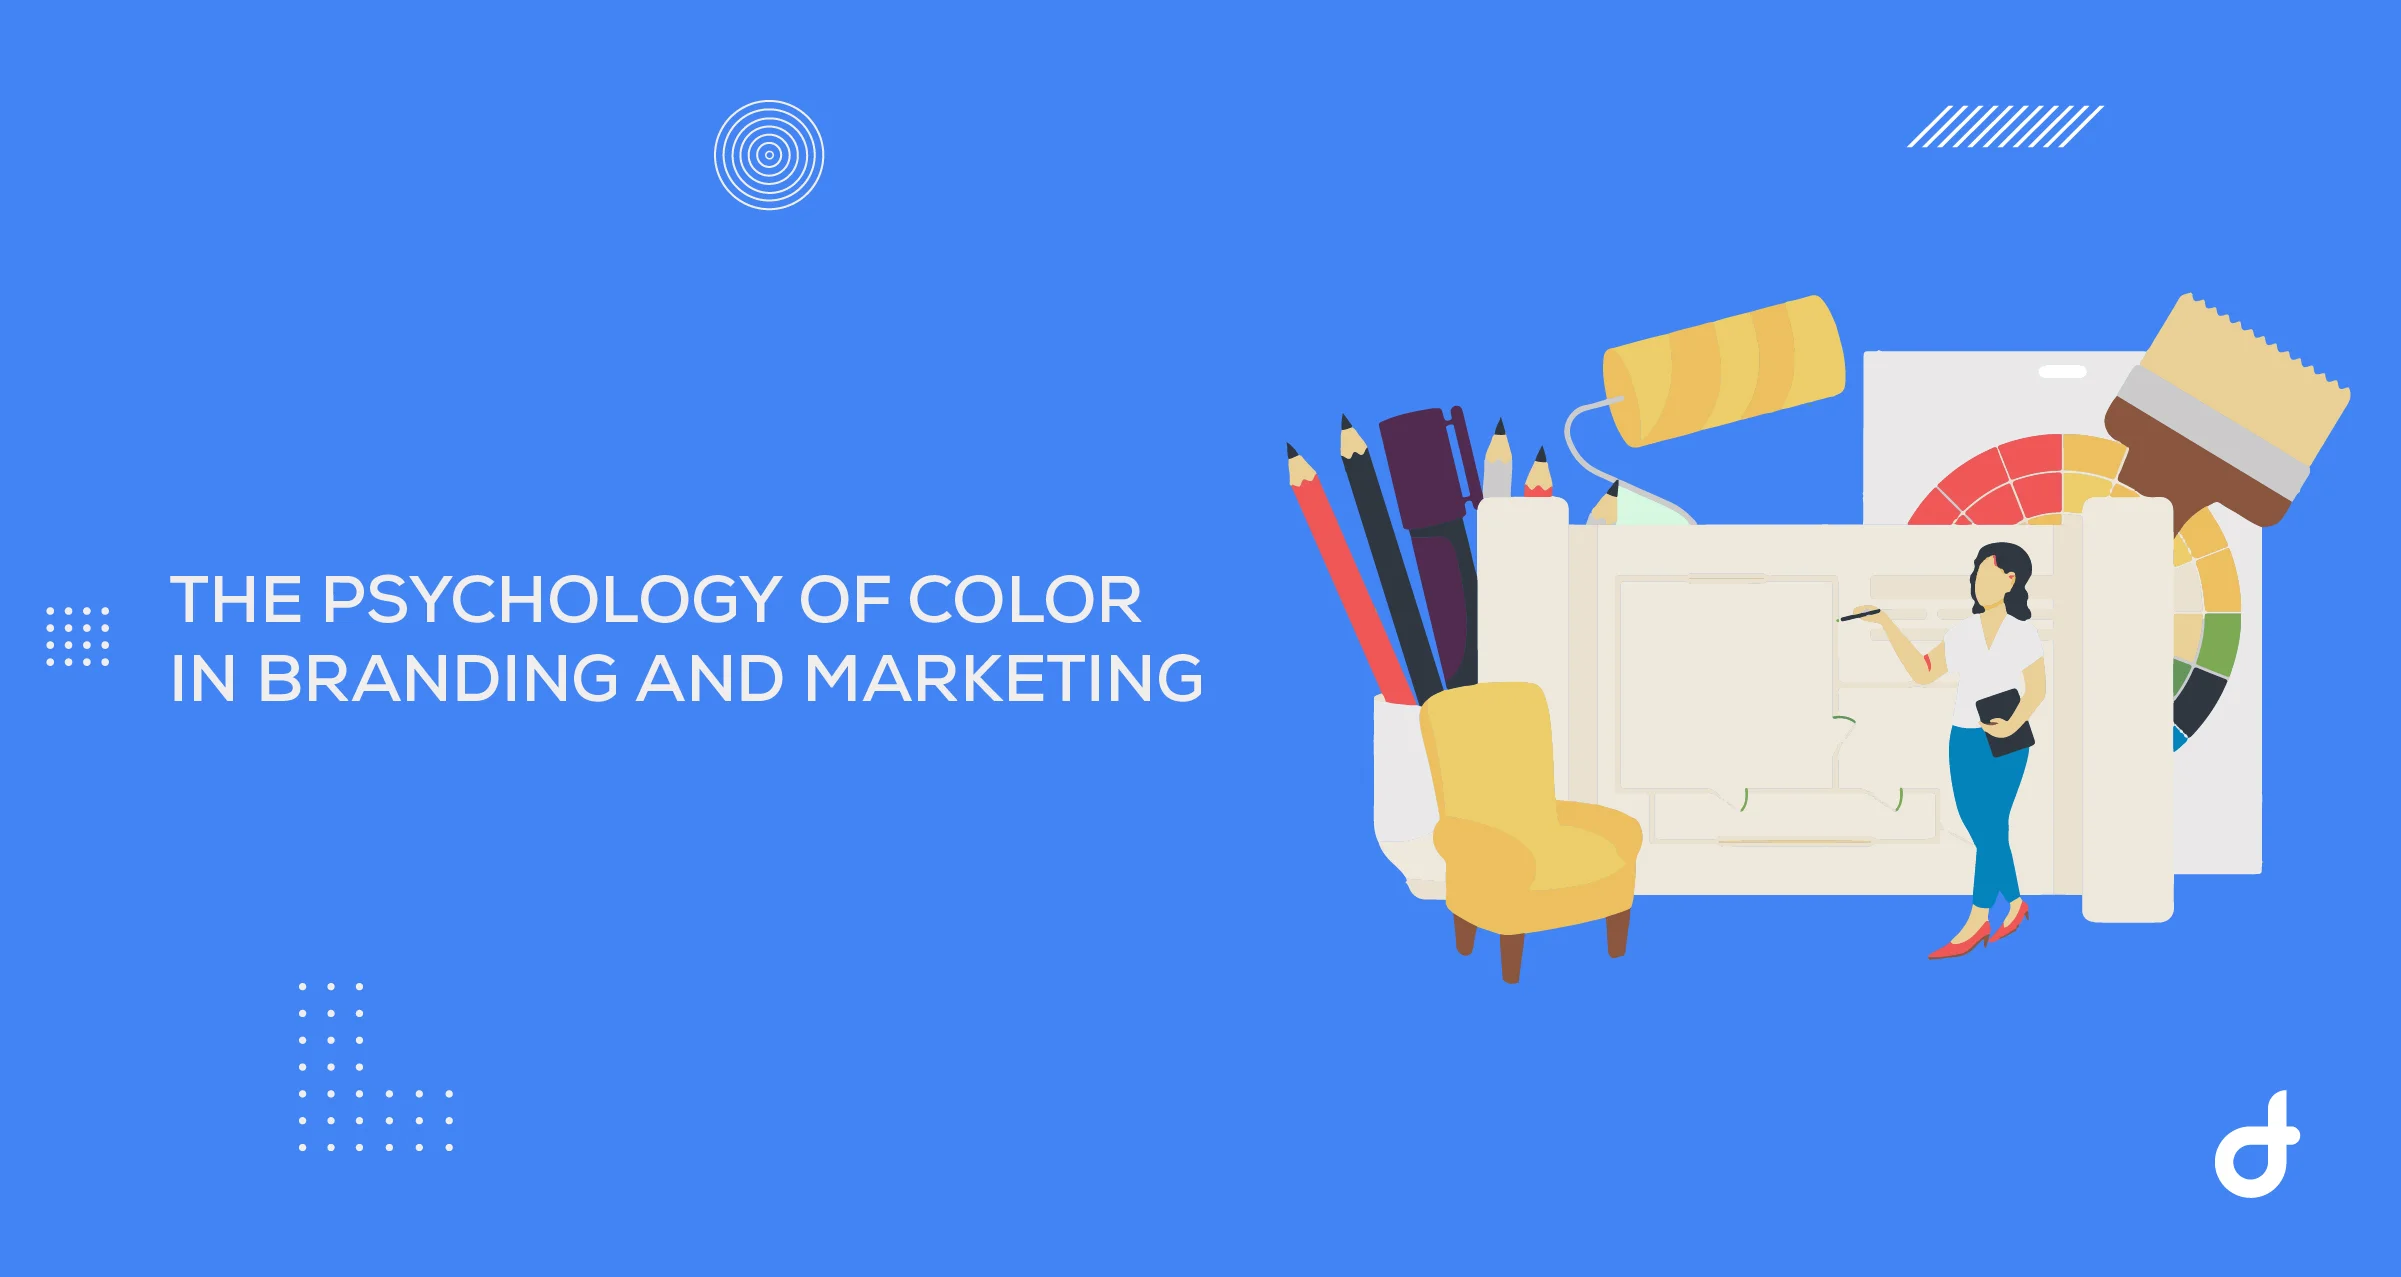 THE PSYCHOLOGY OF COLOR IN BRANDING AND MARKETING